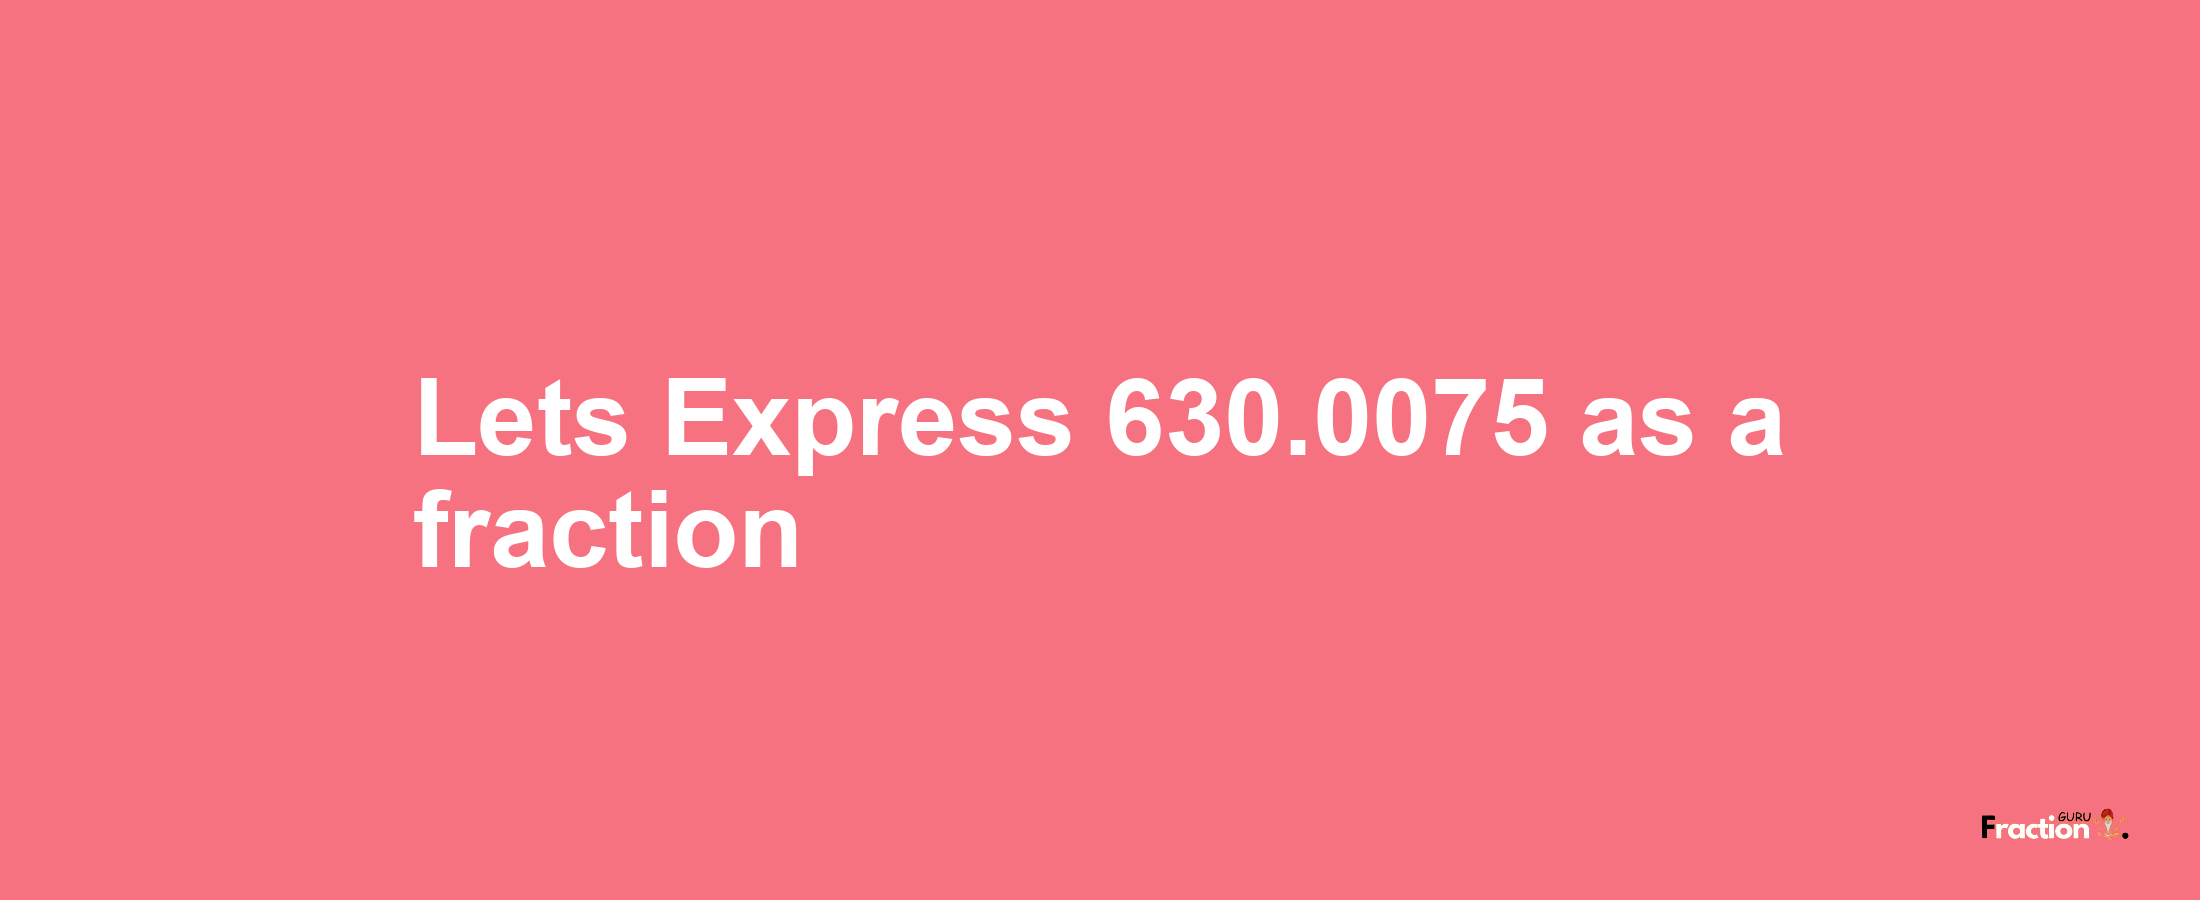 Lets Express 630.0075 as afraction